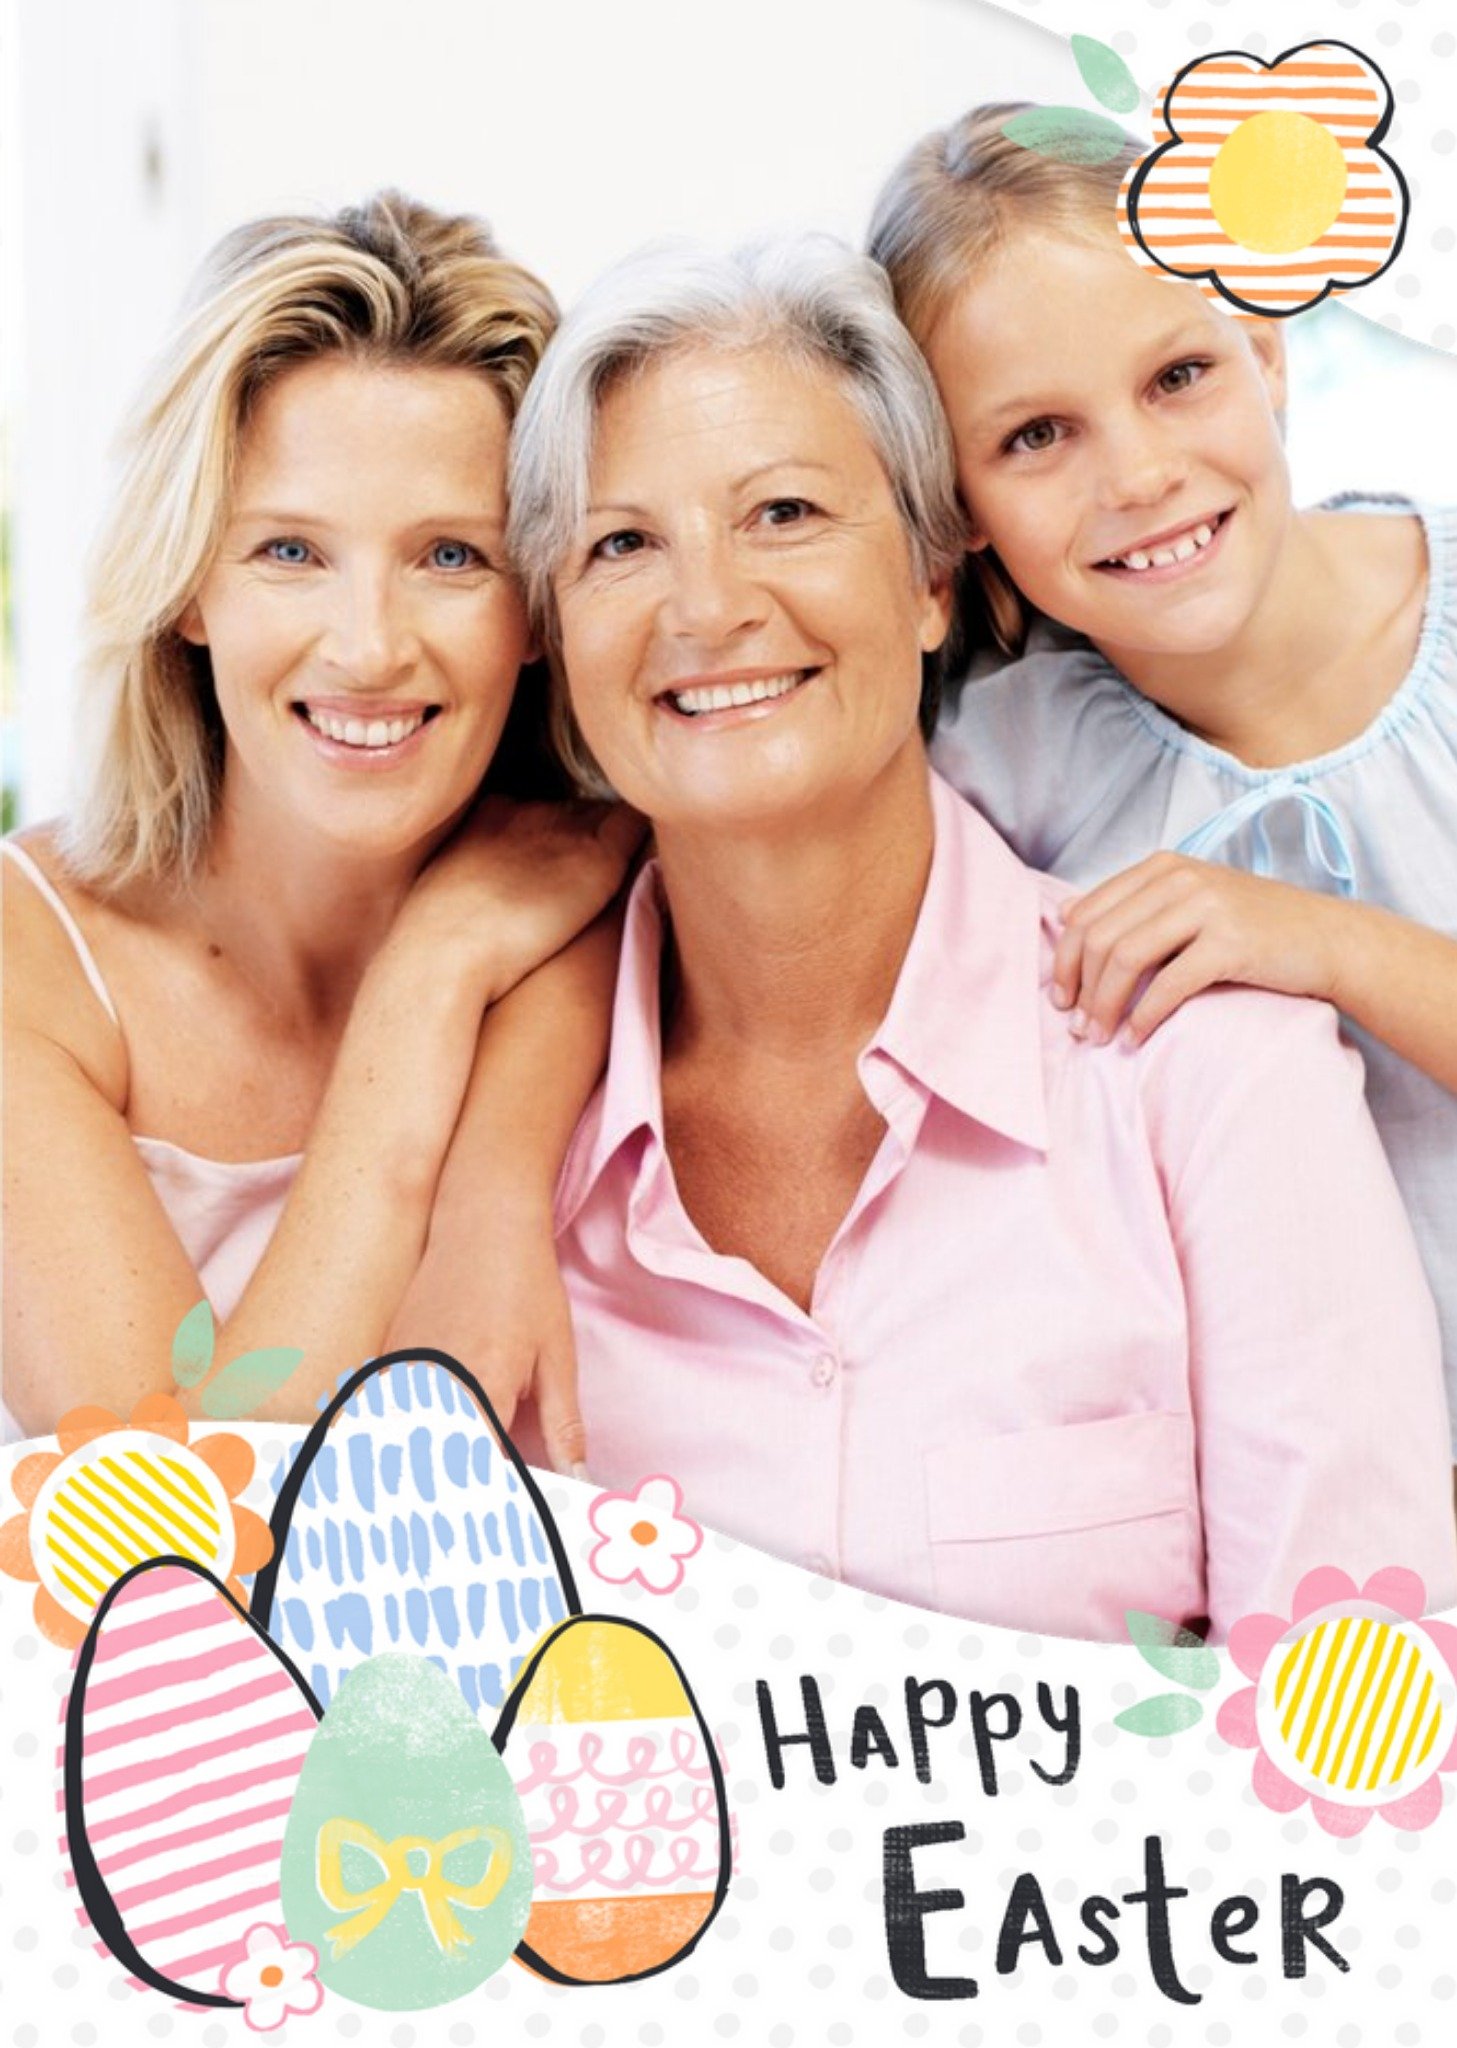 Moonpig Pastel Eggs And Flowers Personalised Photo Upload Happy Easter Card, Large